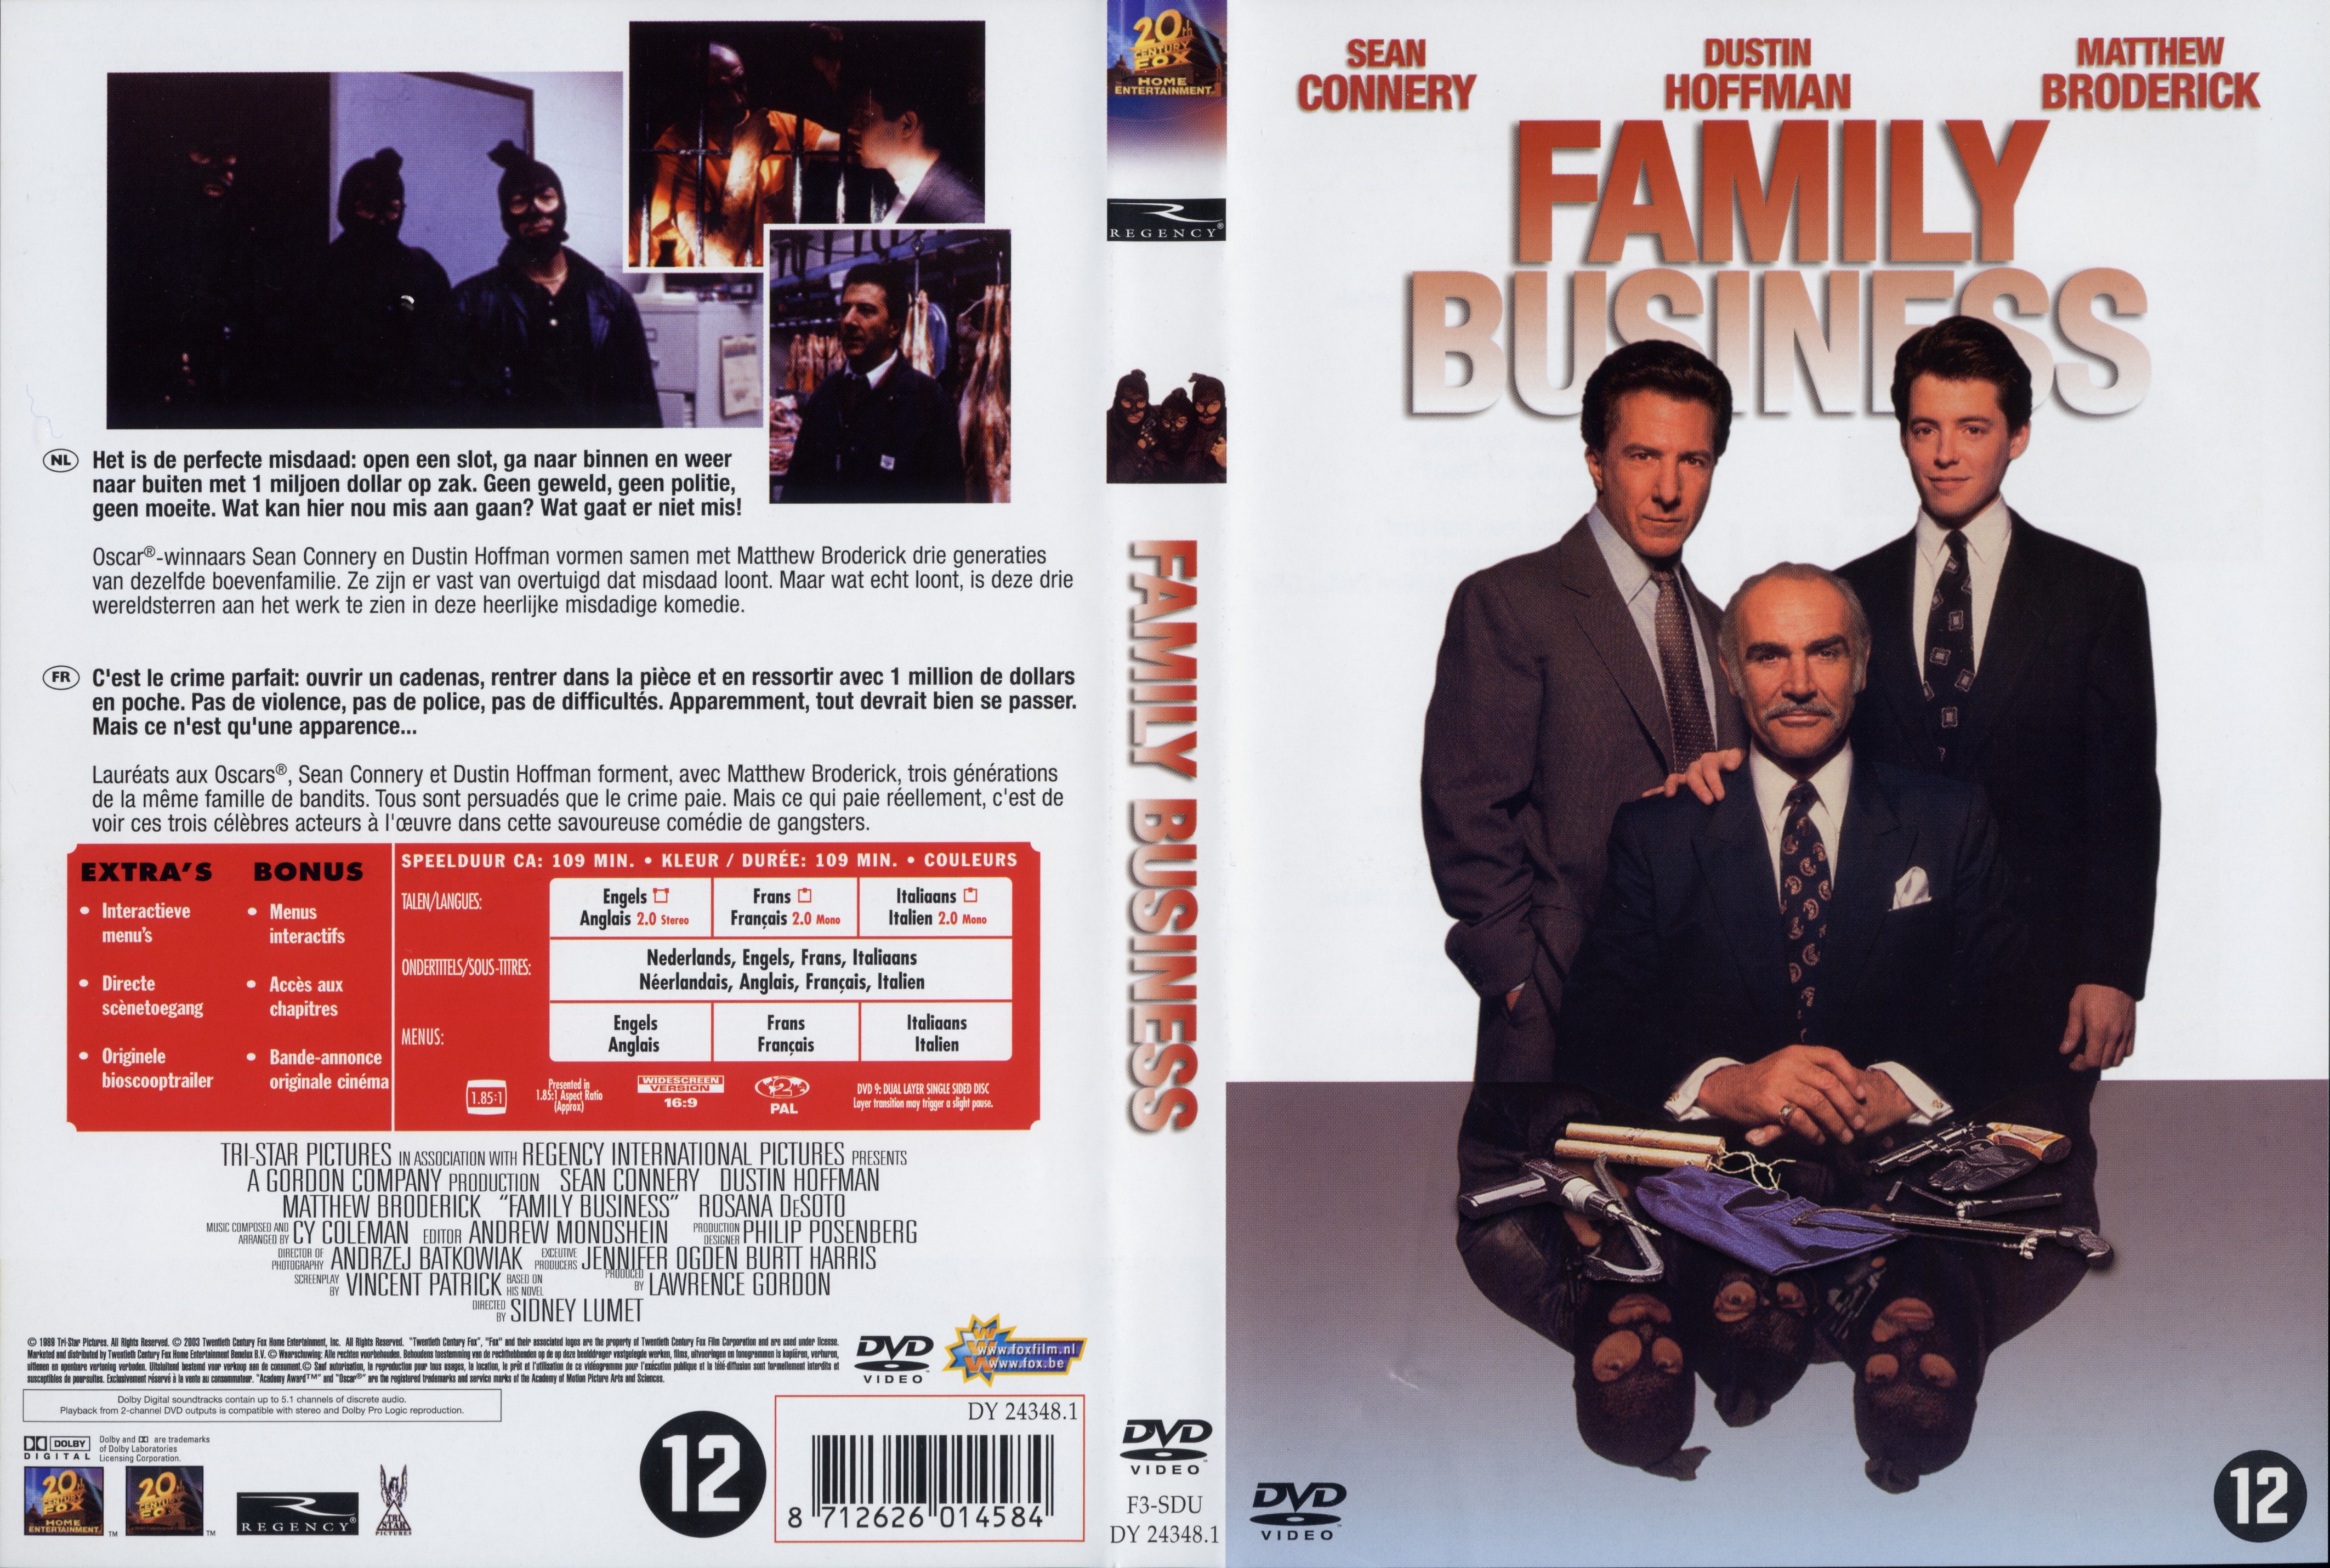 Jaquette DVD Family business